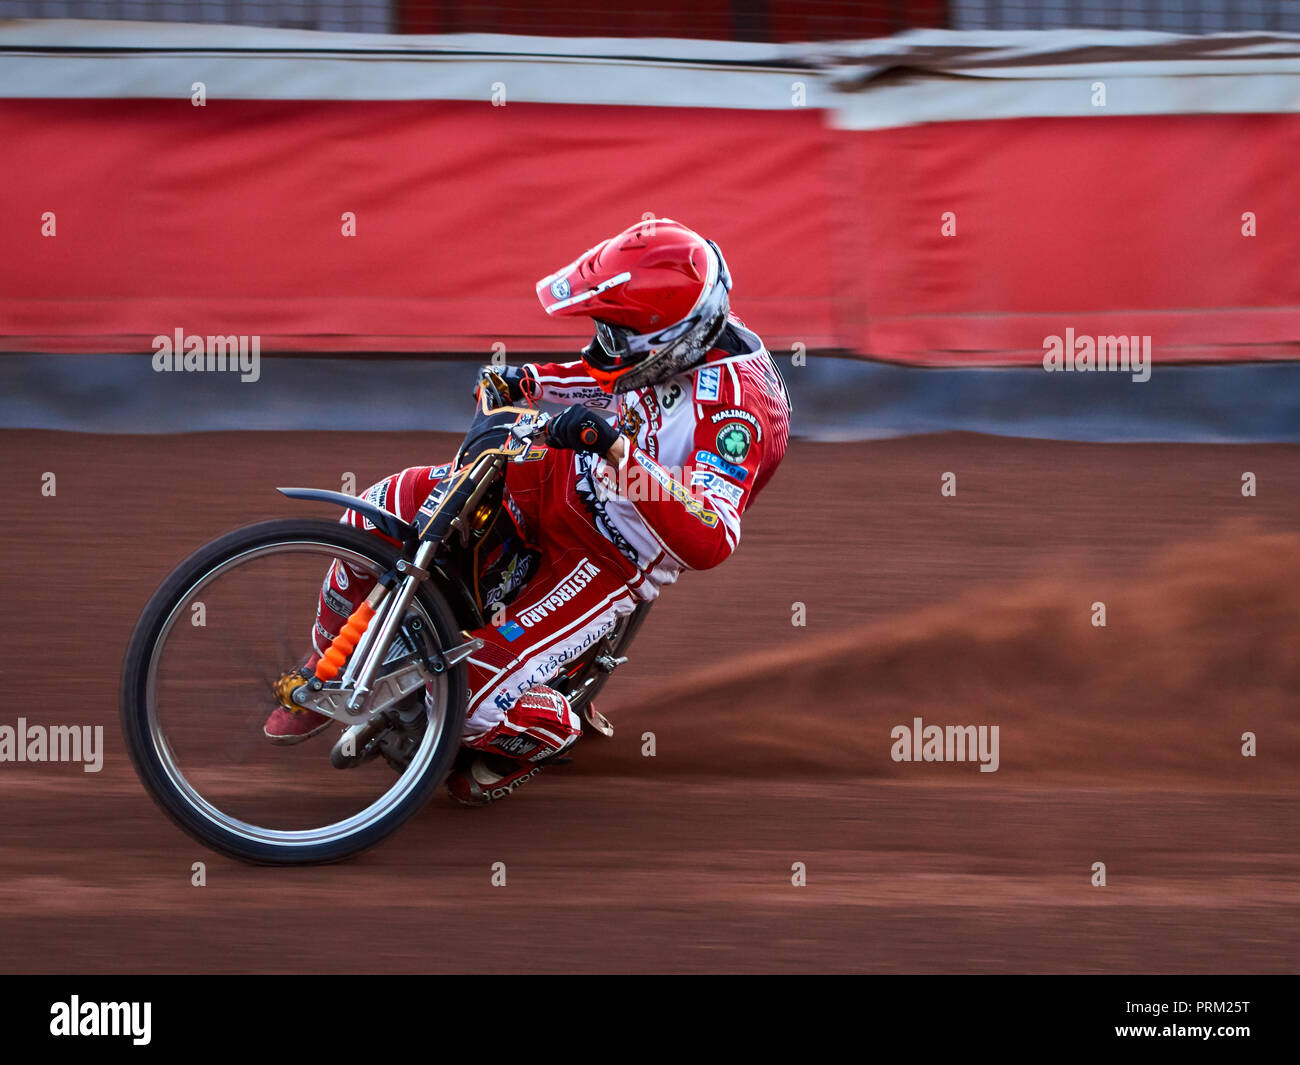 Speedway match between Glasgow Tigers and Newcastle Diamonds on a race track in Glasgow. Stock Photo